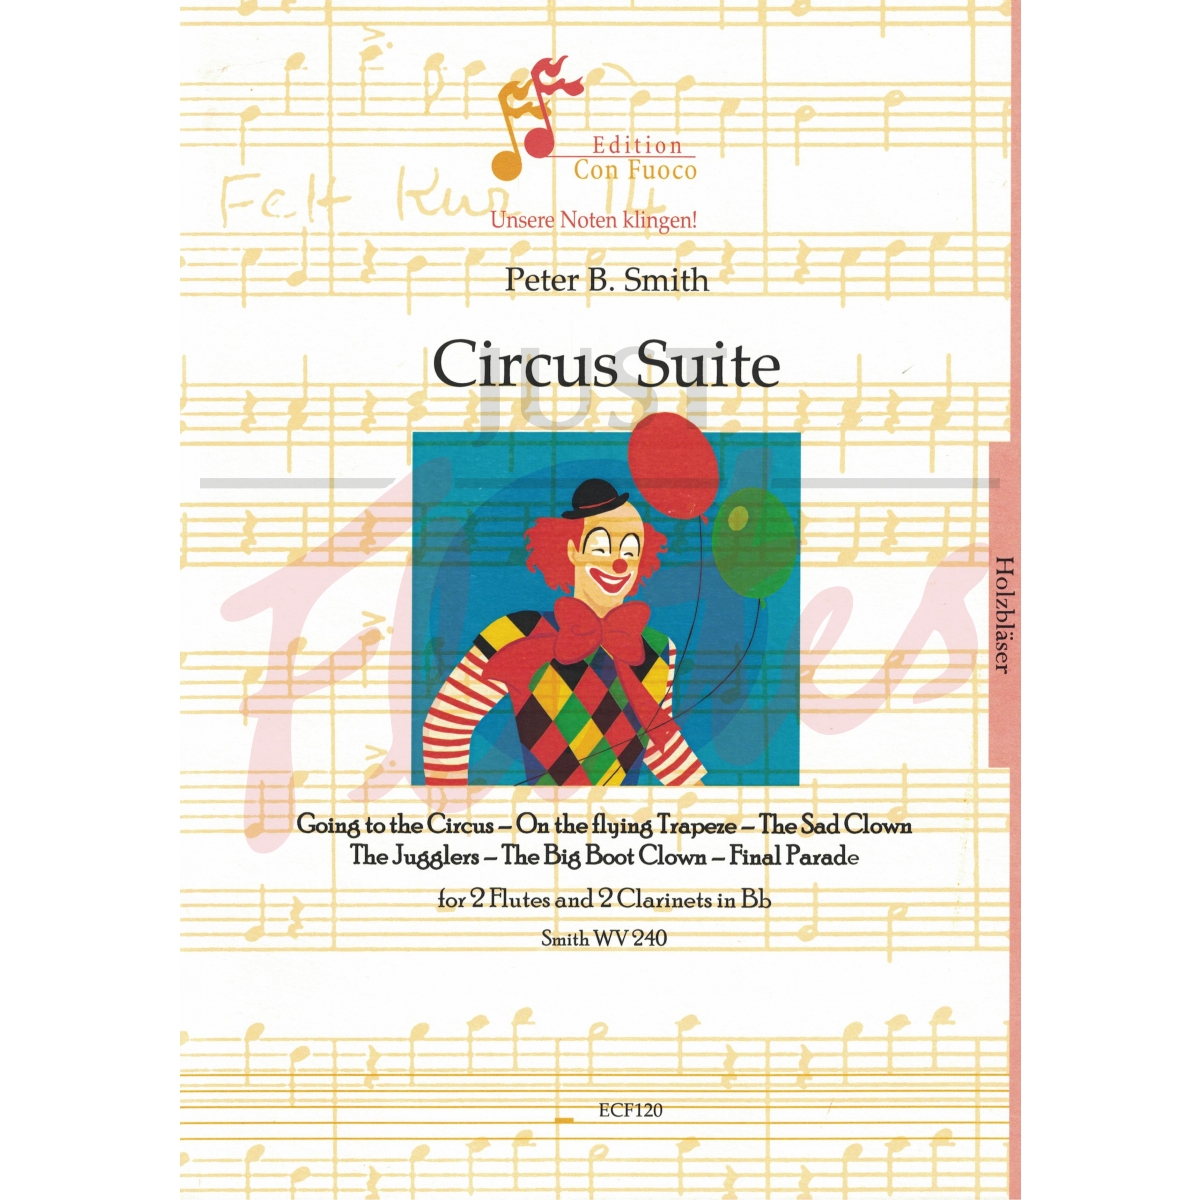 Circus Suite for 2 Flutes and 2 Clarinets